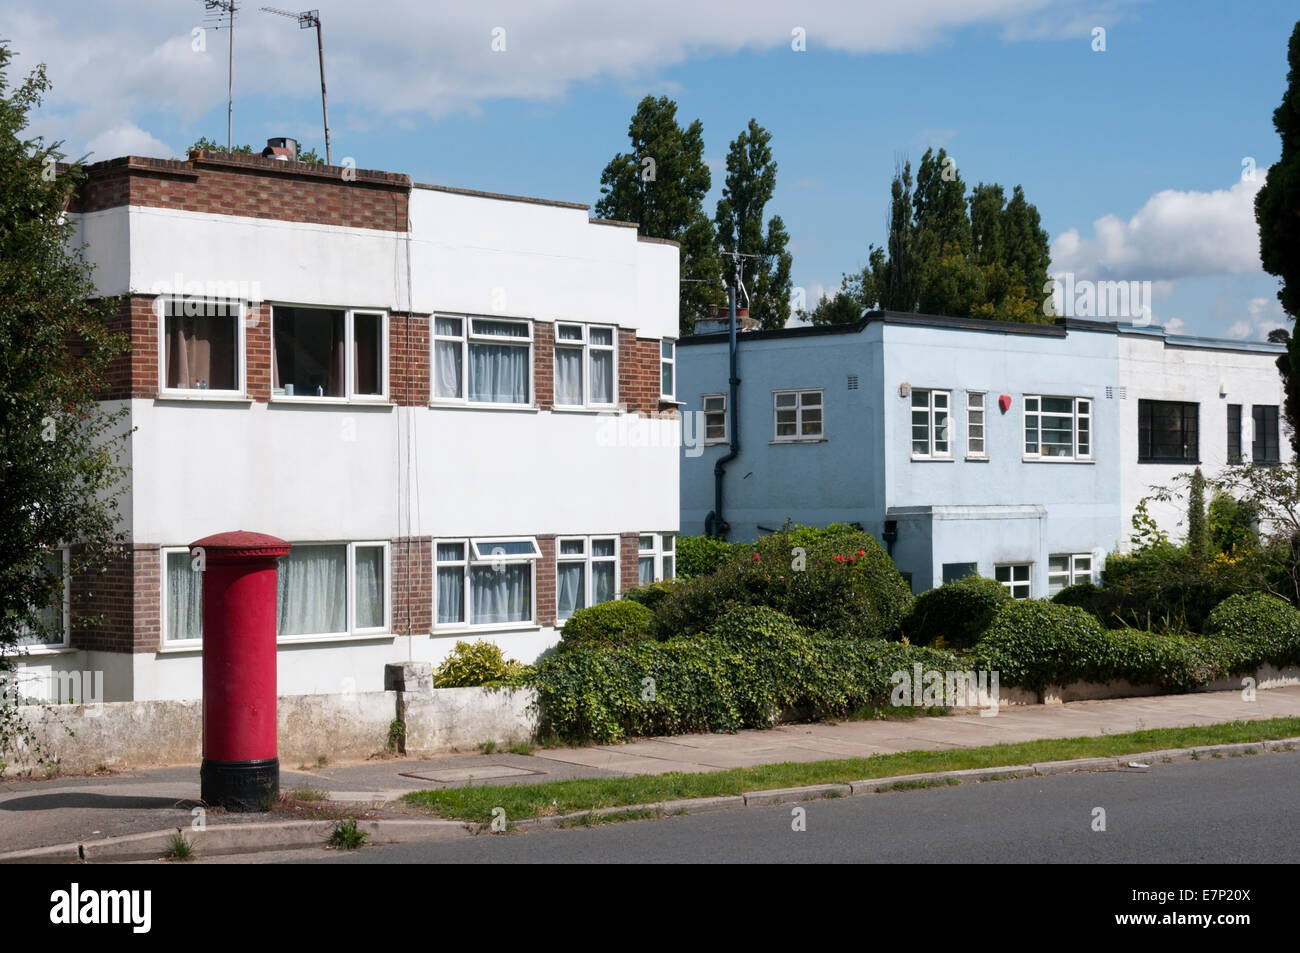 Art deco style semi-detached houses in Bromley, South London. Stock Photo